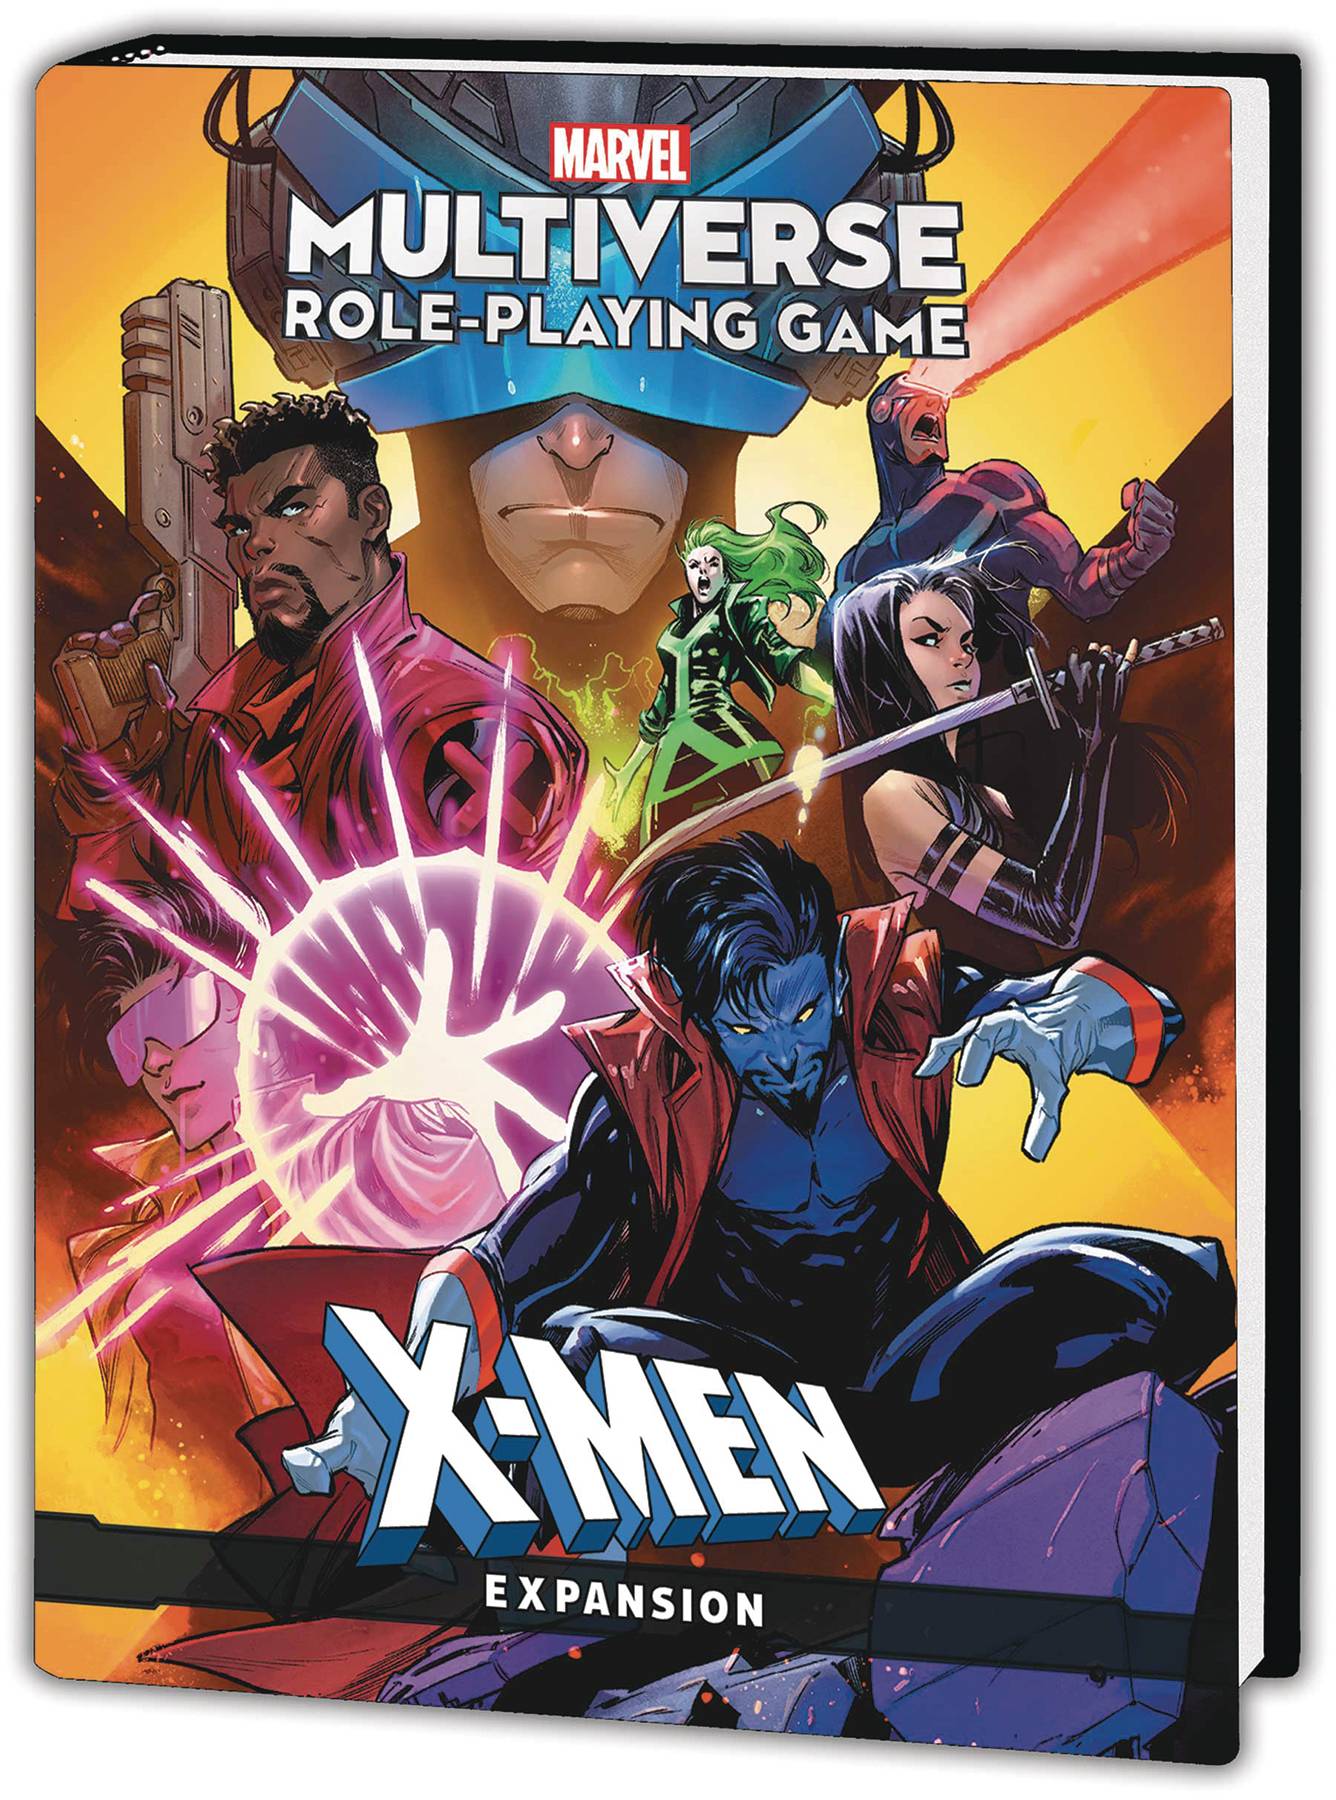 MARVEL MULTIVERSE ROLE PLAYING GAME X-MEN EXPANSION HC - PRE ORDER [FOC 24.02]